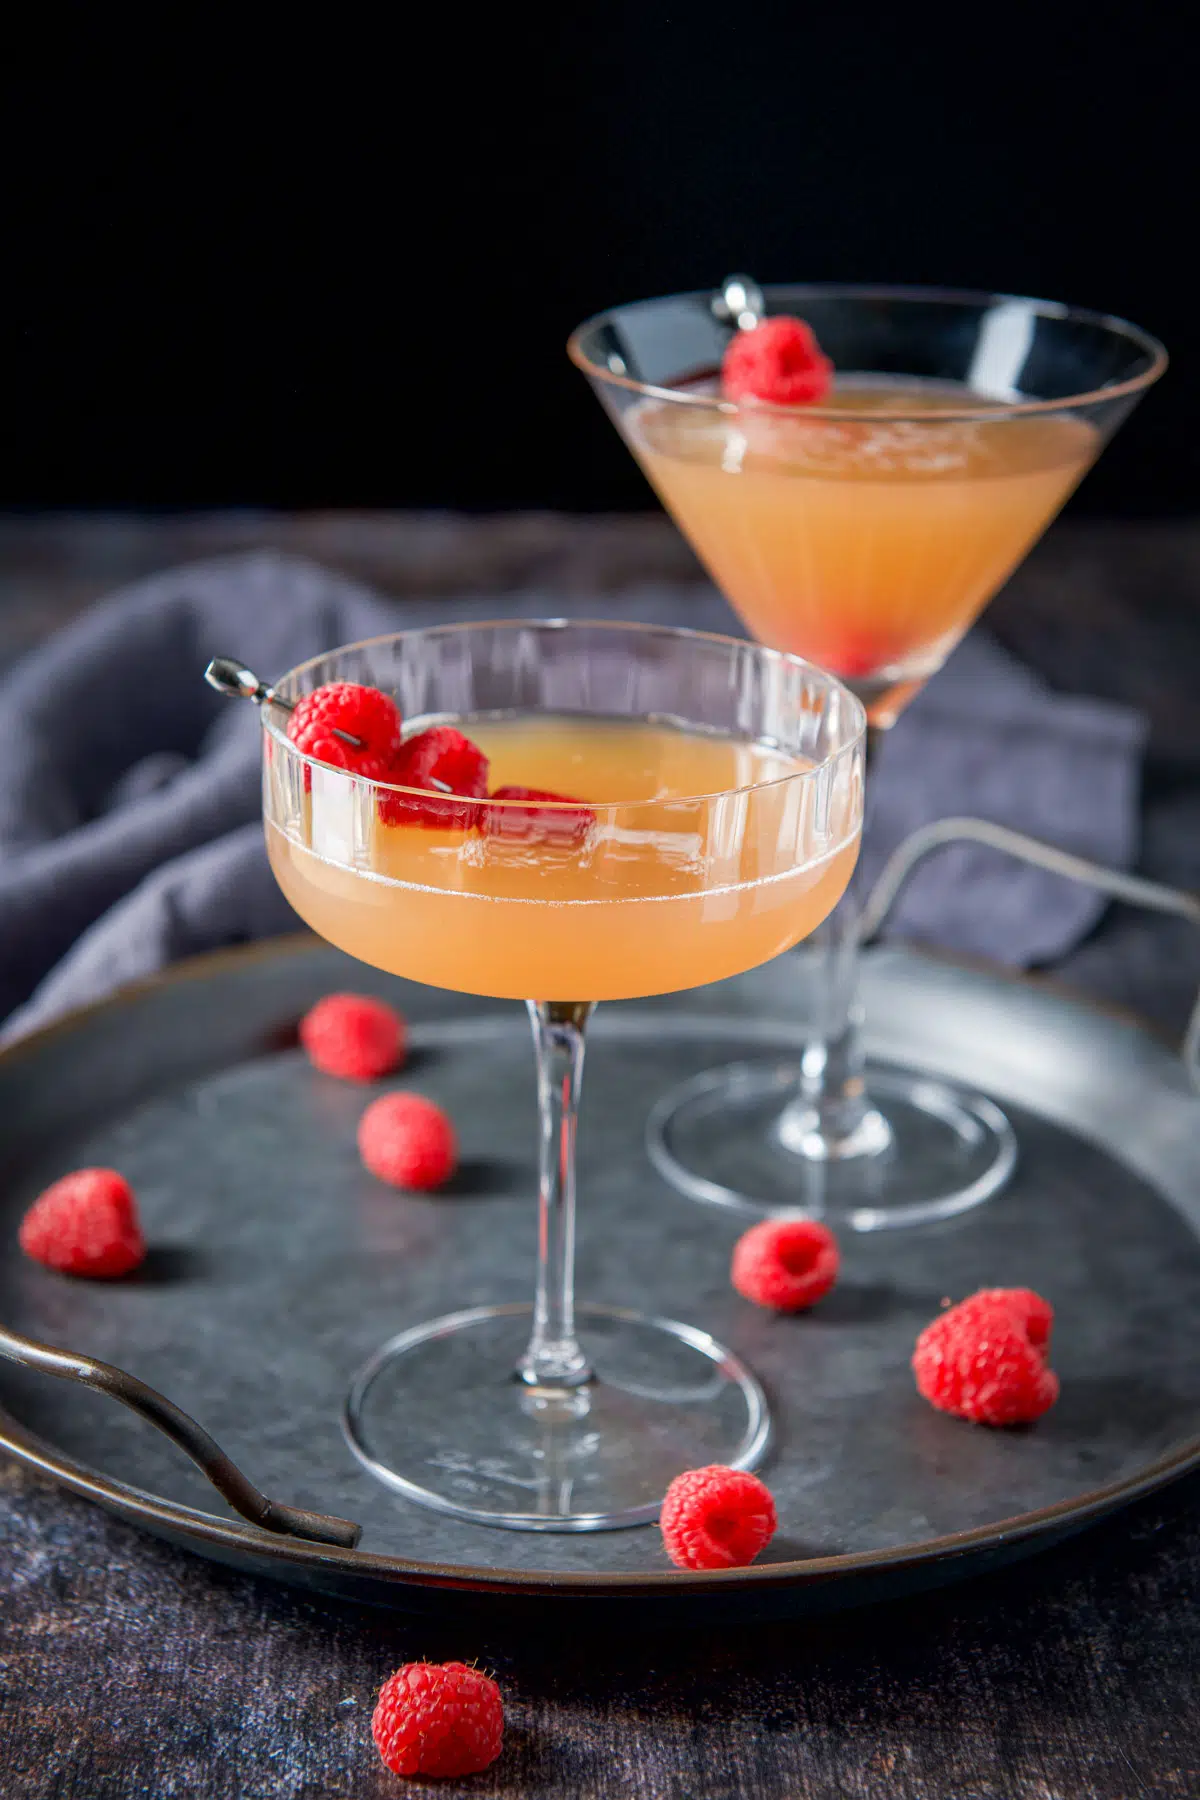 A coupe glass with an amber cocktail with raspberries as garnish